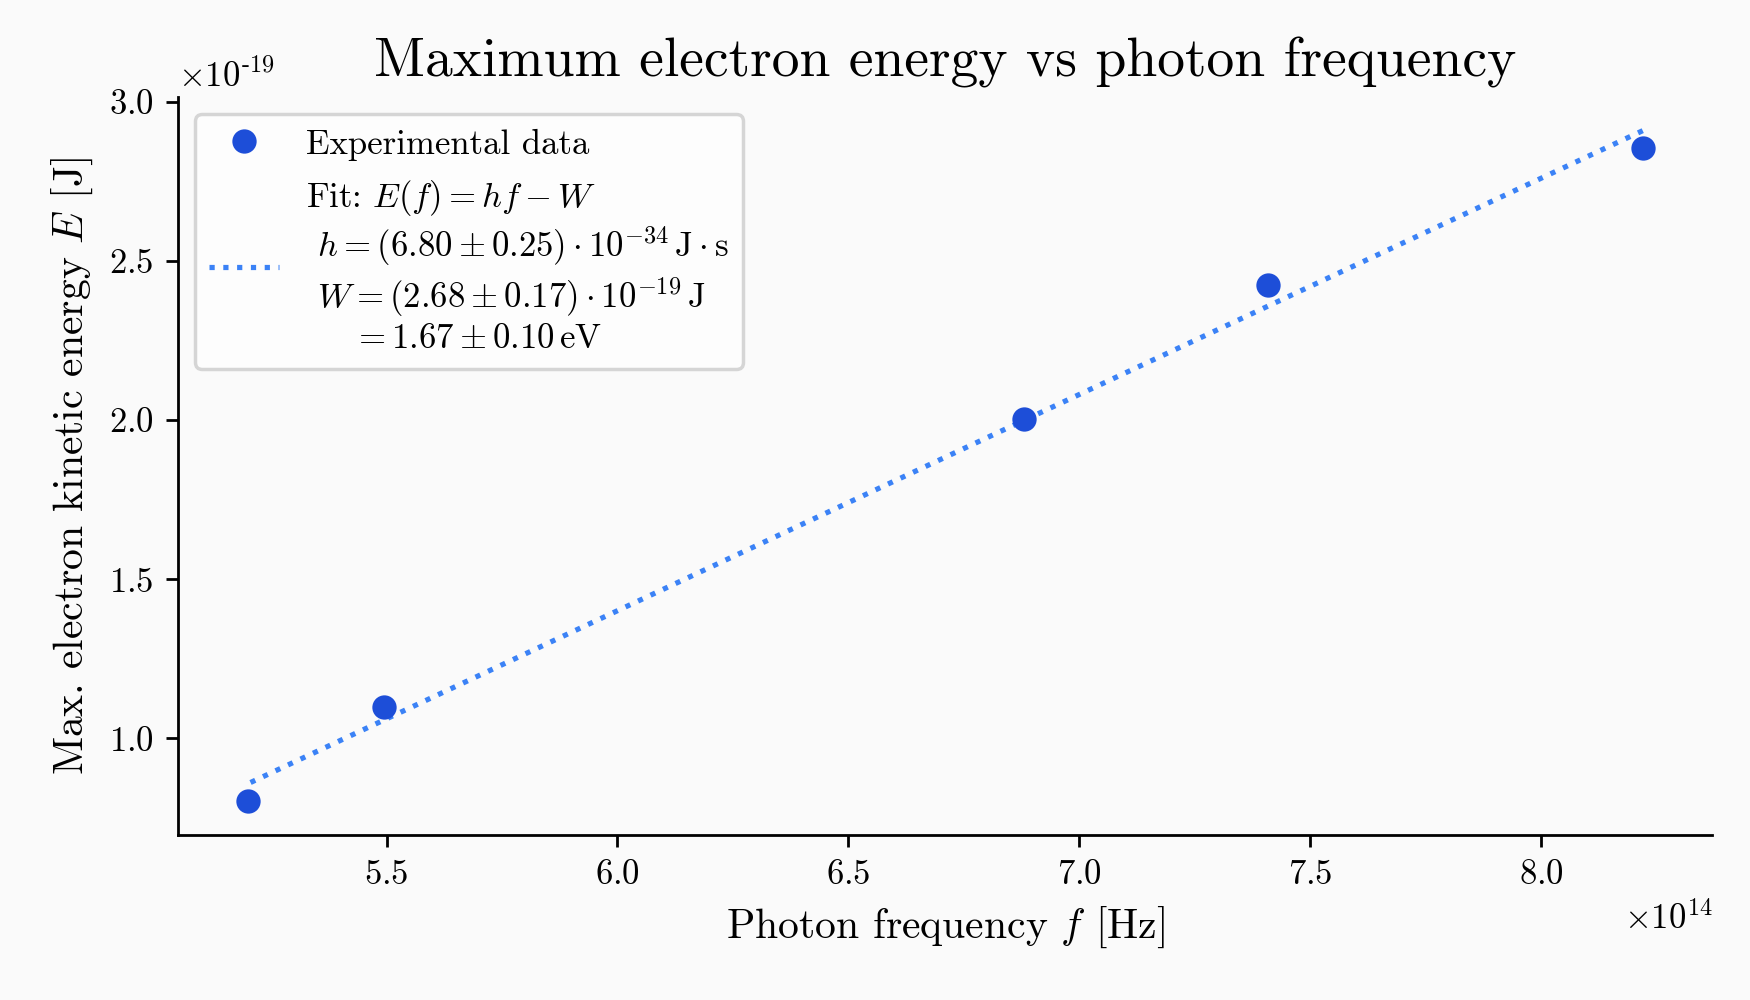 Estimate of Planck's constant and photocathode work function from experimental data.